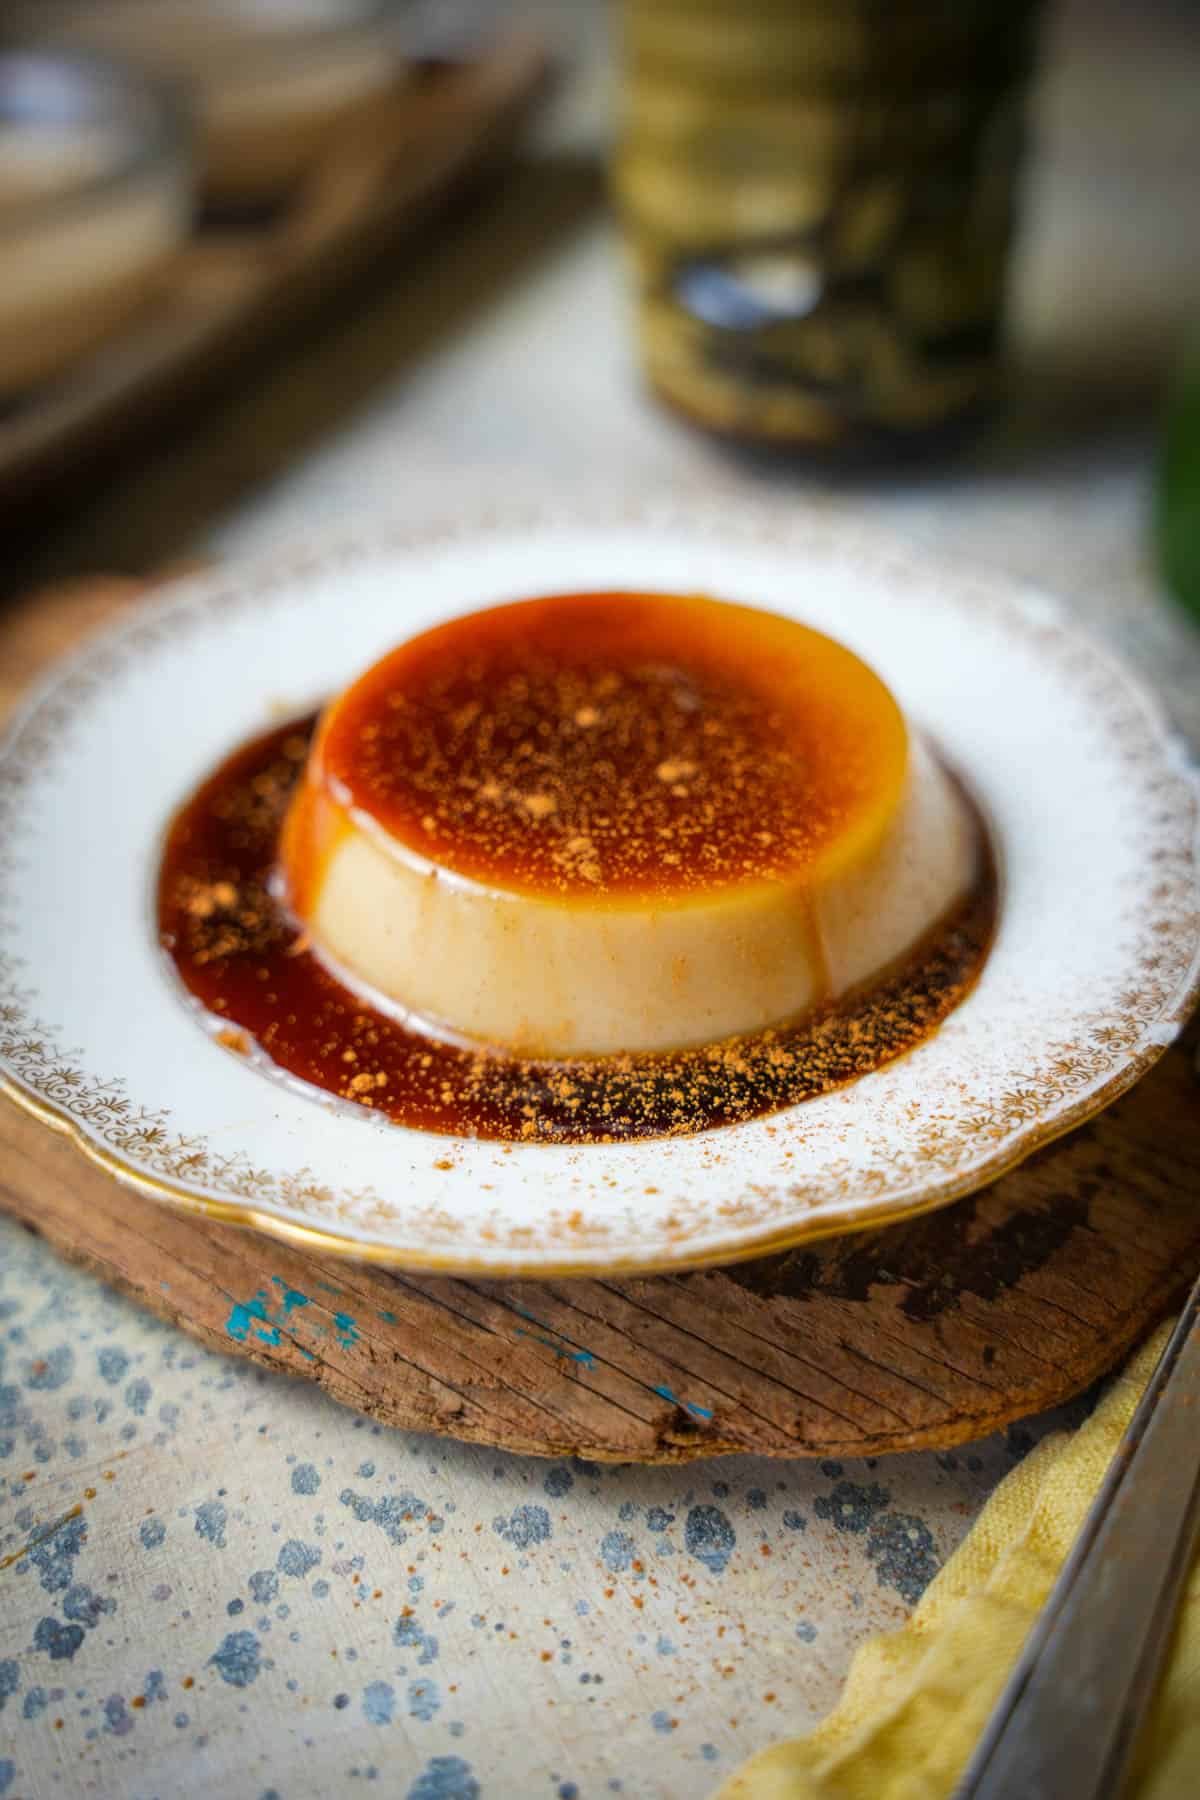 Banh flan on a fancy small plate on top of a wooden surface. Tea, and additional banh fan servings can be seen in the background.